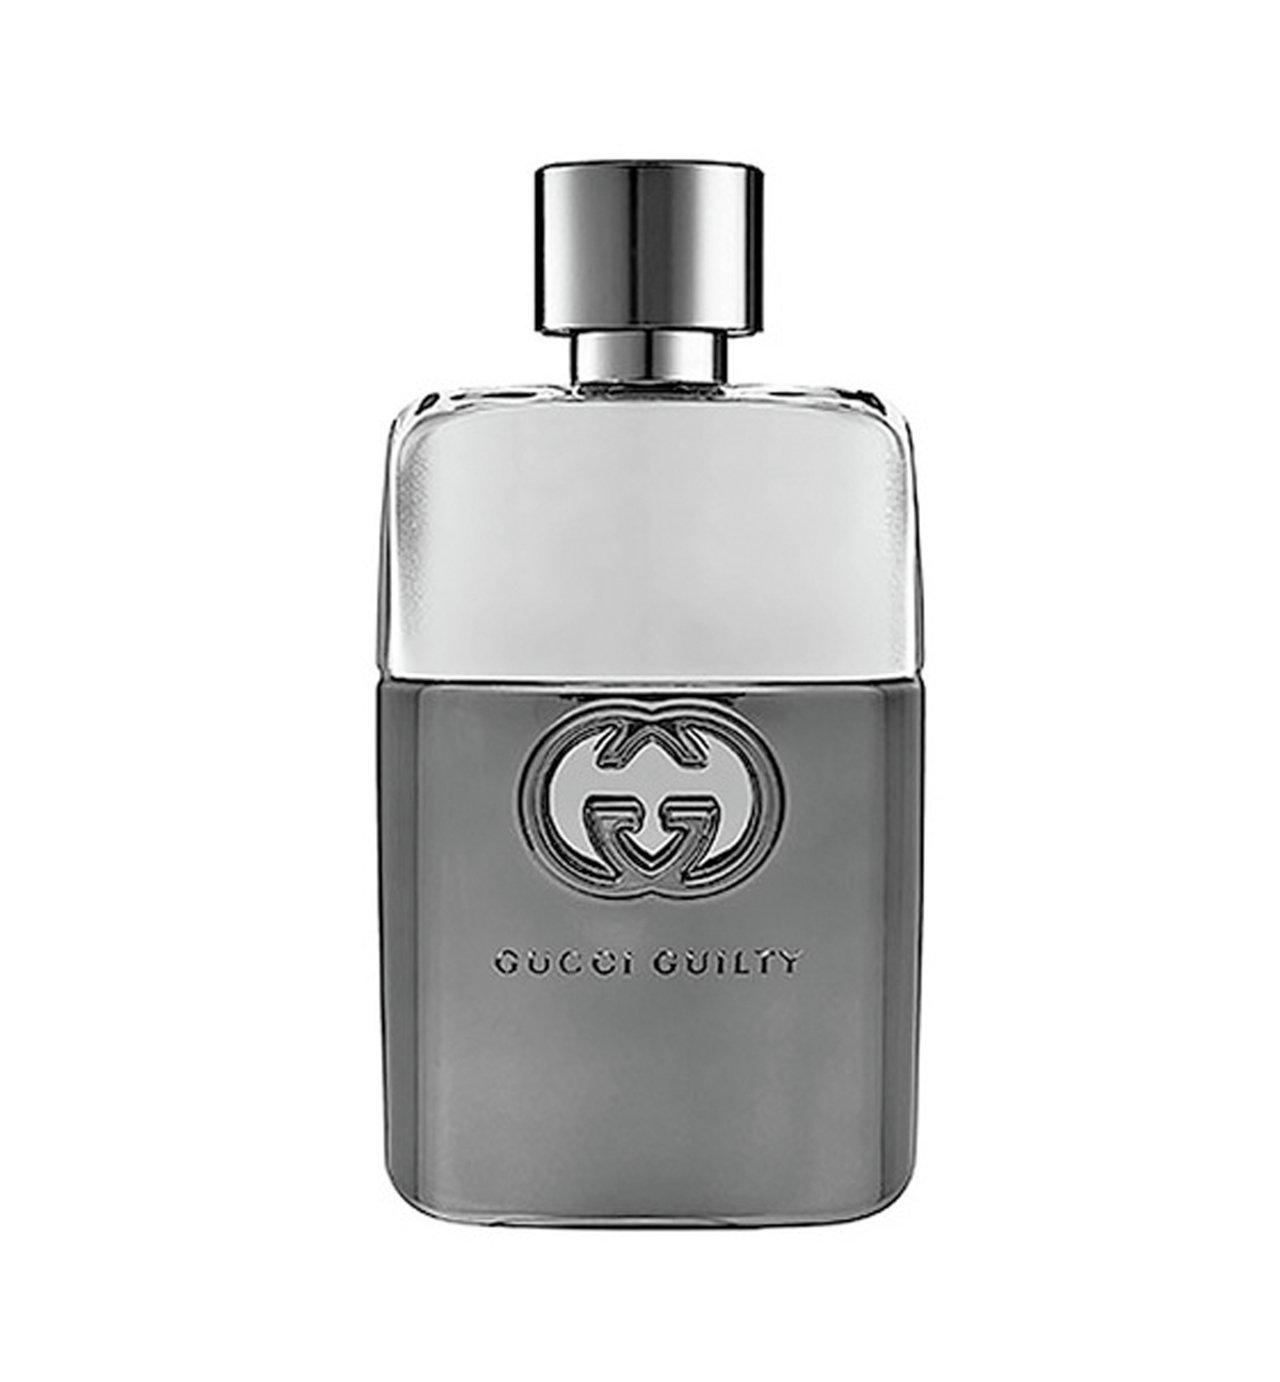 gucci guilty uk price